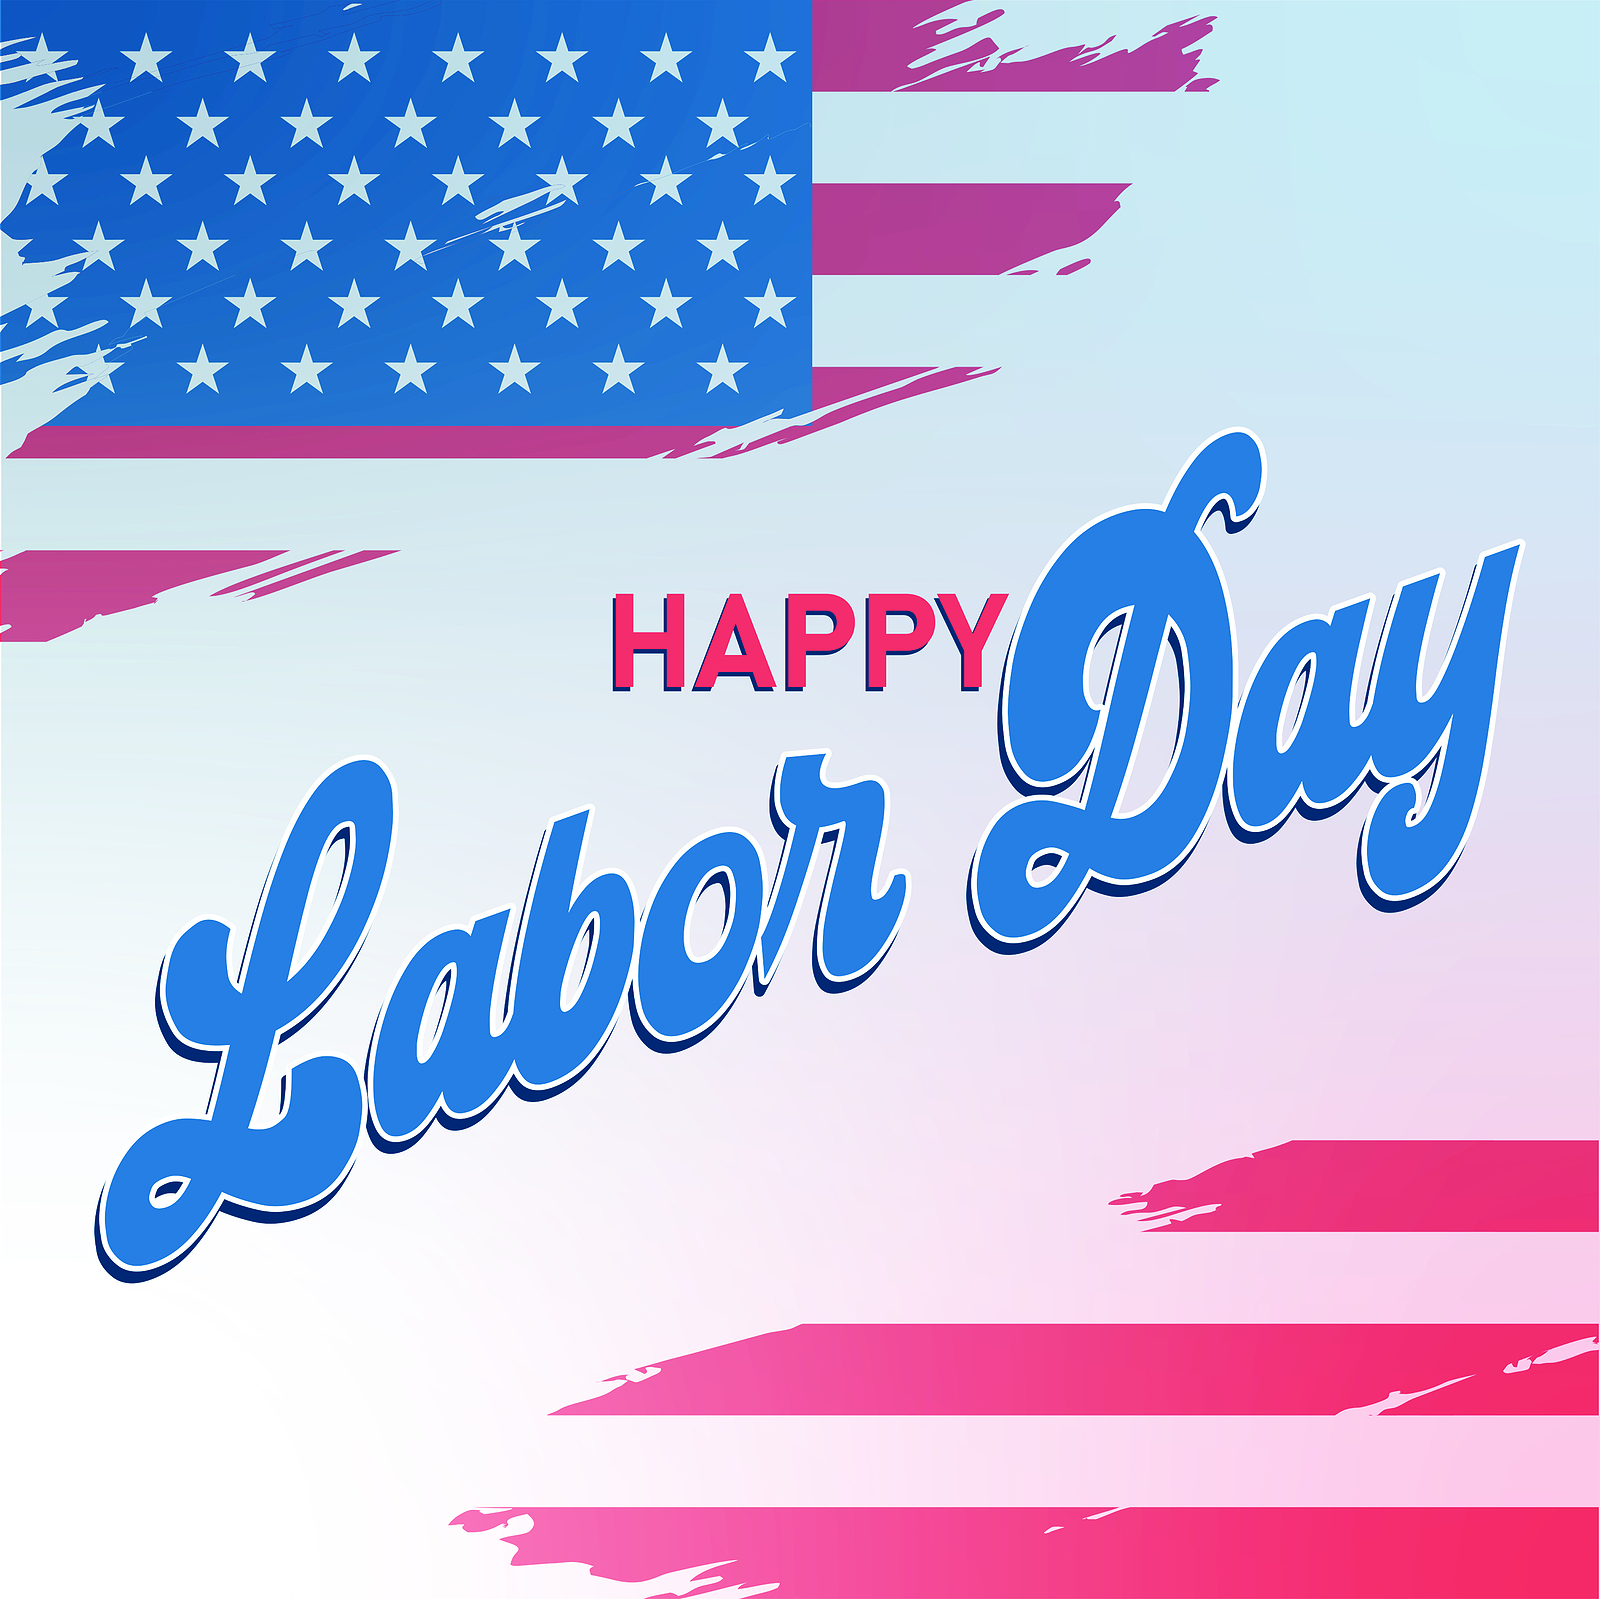 Happy Labor Day from the Fine Art Shippers Team